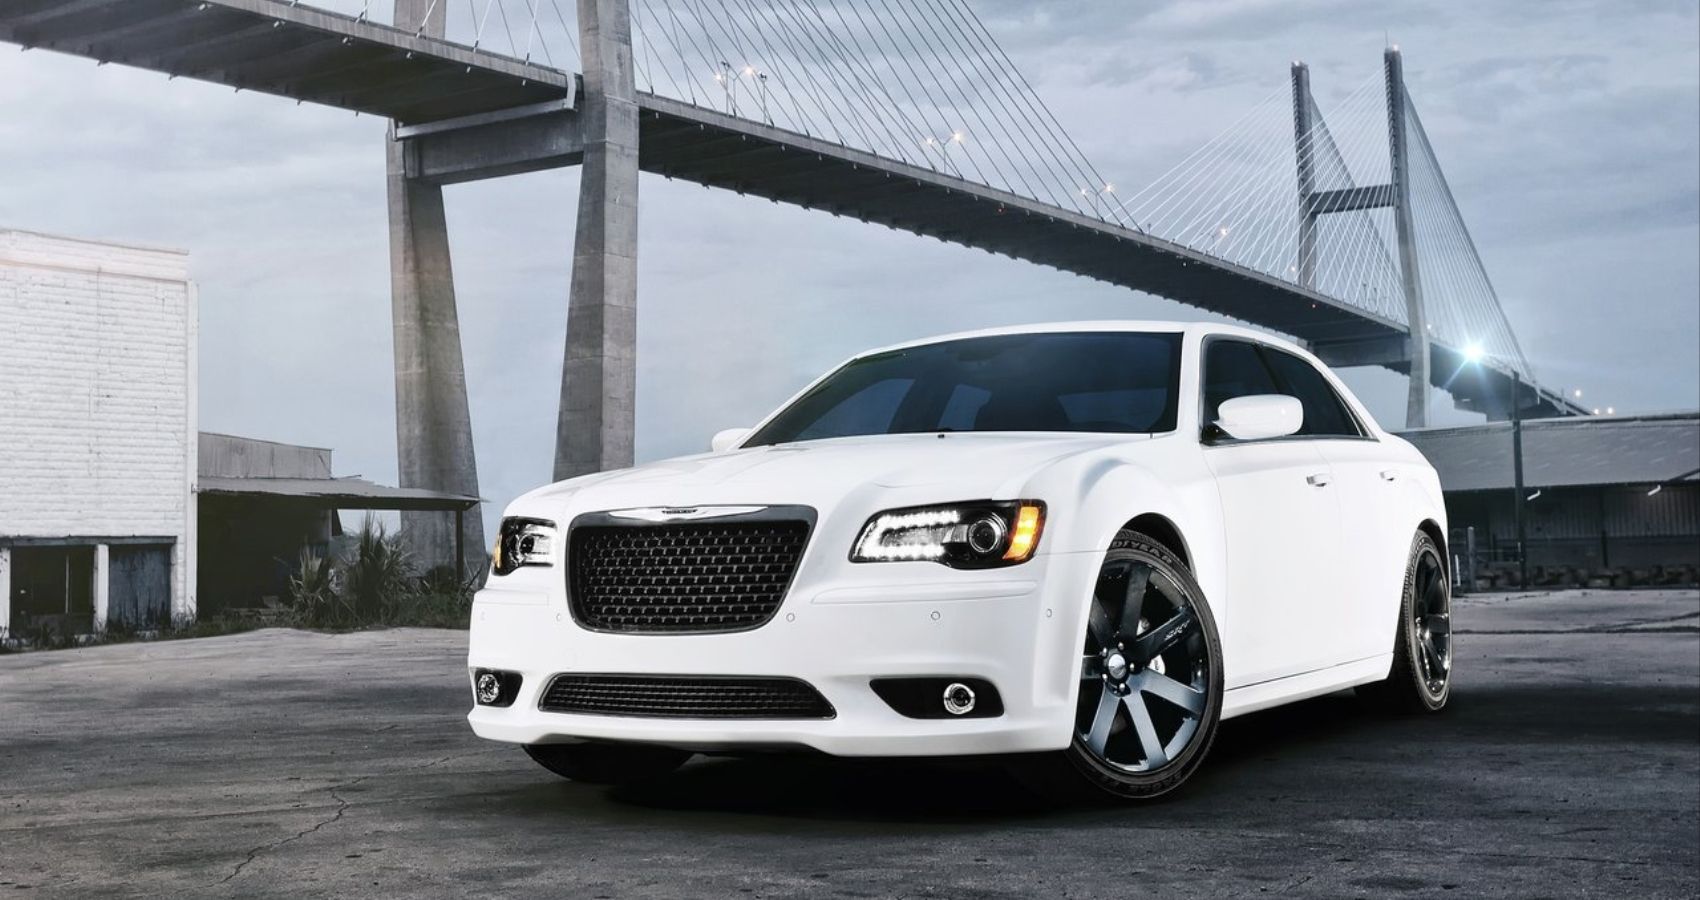 Why The Chrysler 300 SRT8 Is Truly A Sleeper Muscle Car